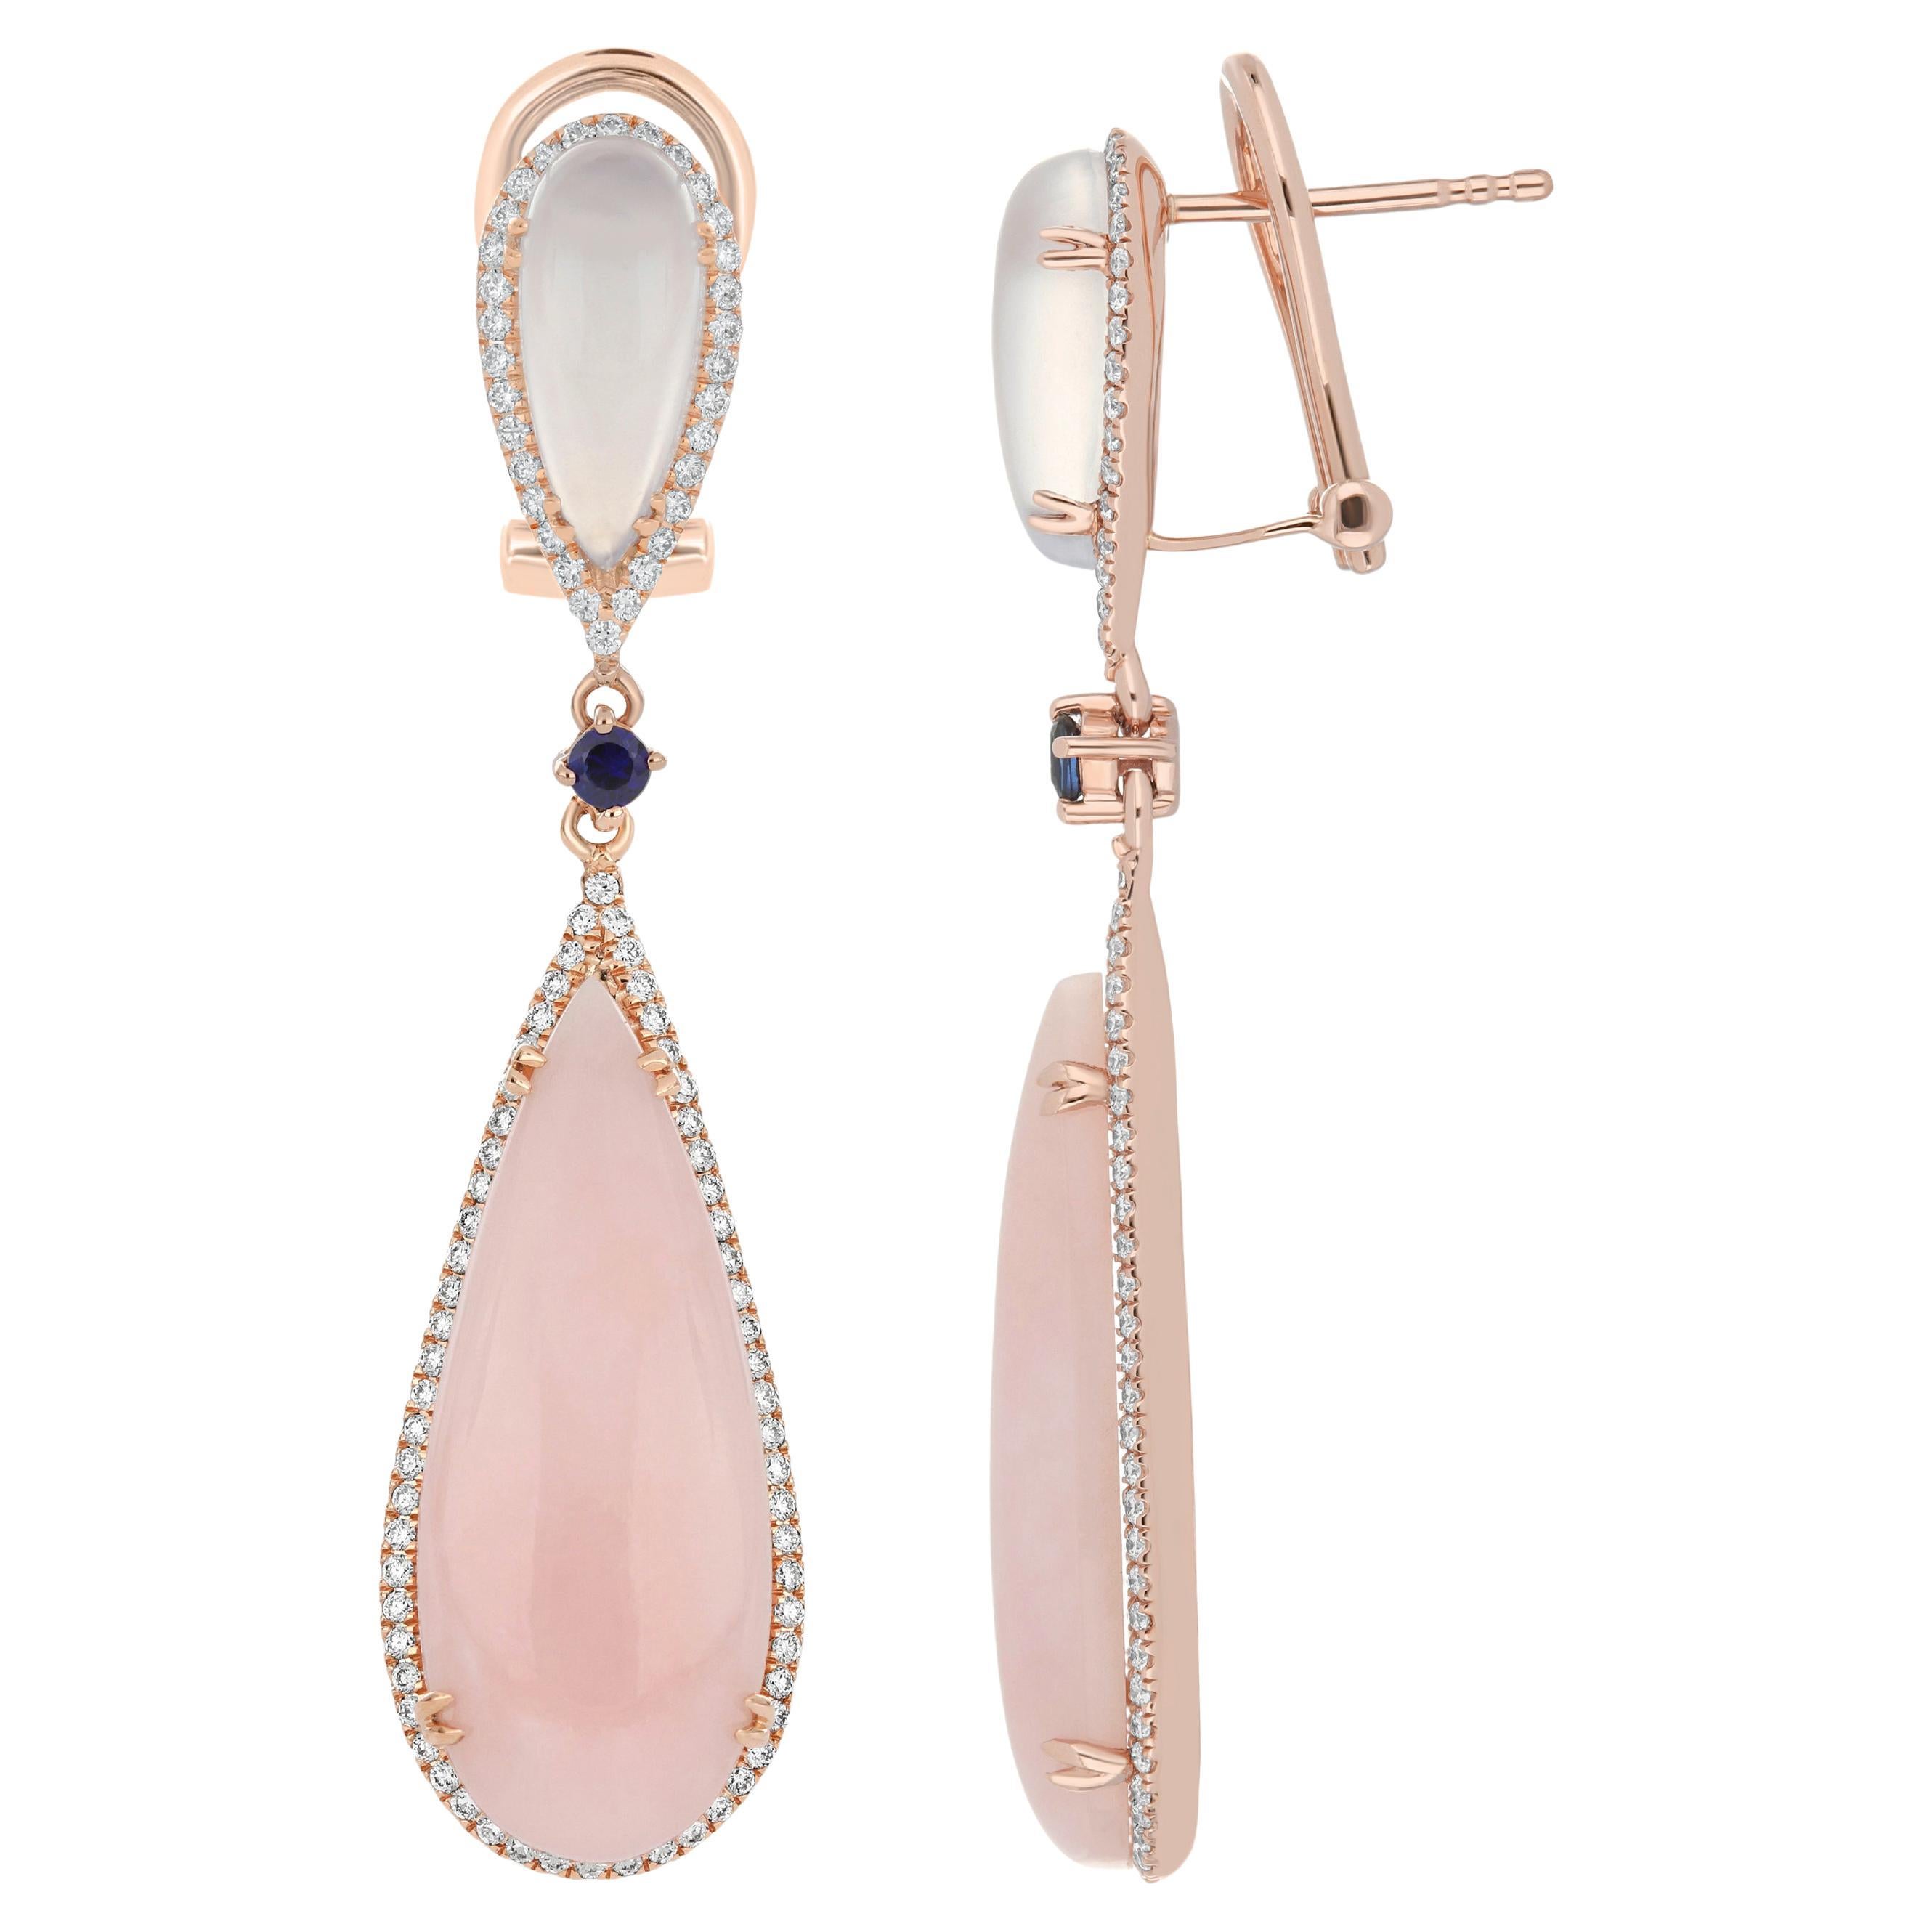 Elegant and exquisitely detailed 14 Karat Rose Gold Mismatched Pair of Earrings, center set with 14.40 Cts .Cab Pear Shape Pink Opal , and 2.60 Cts of Pear Cut Blue Chalcedony  accented with Blue Sapphire and micro pave set Diamonds, weighing